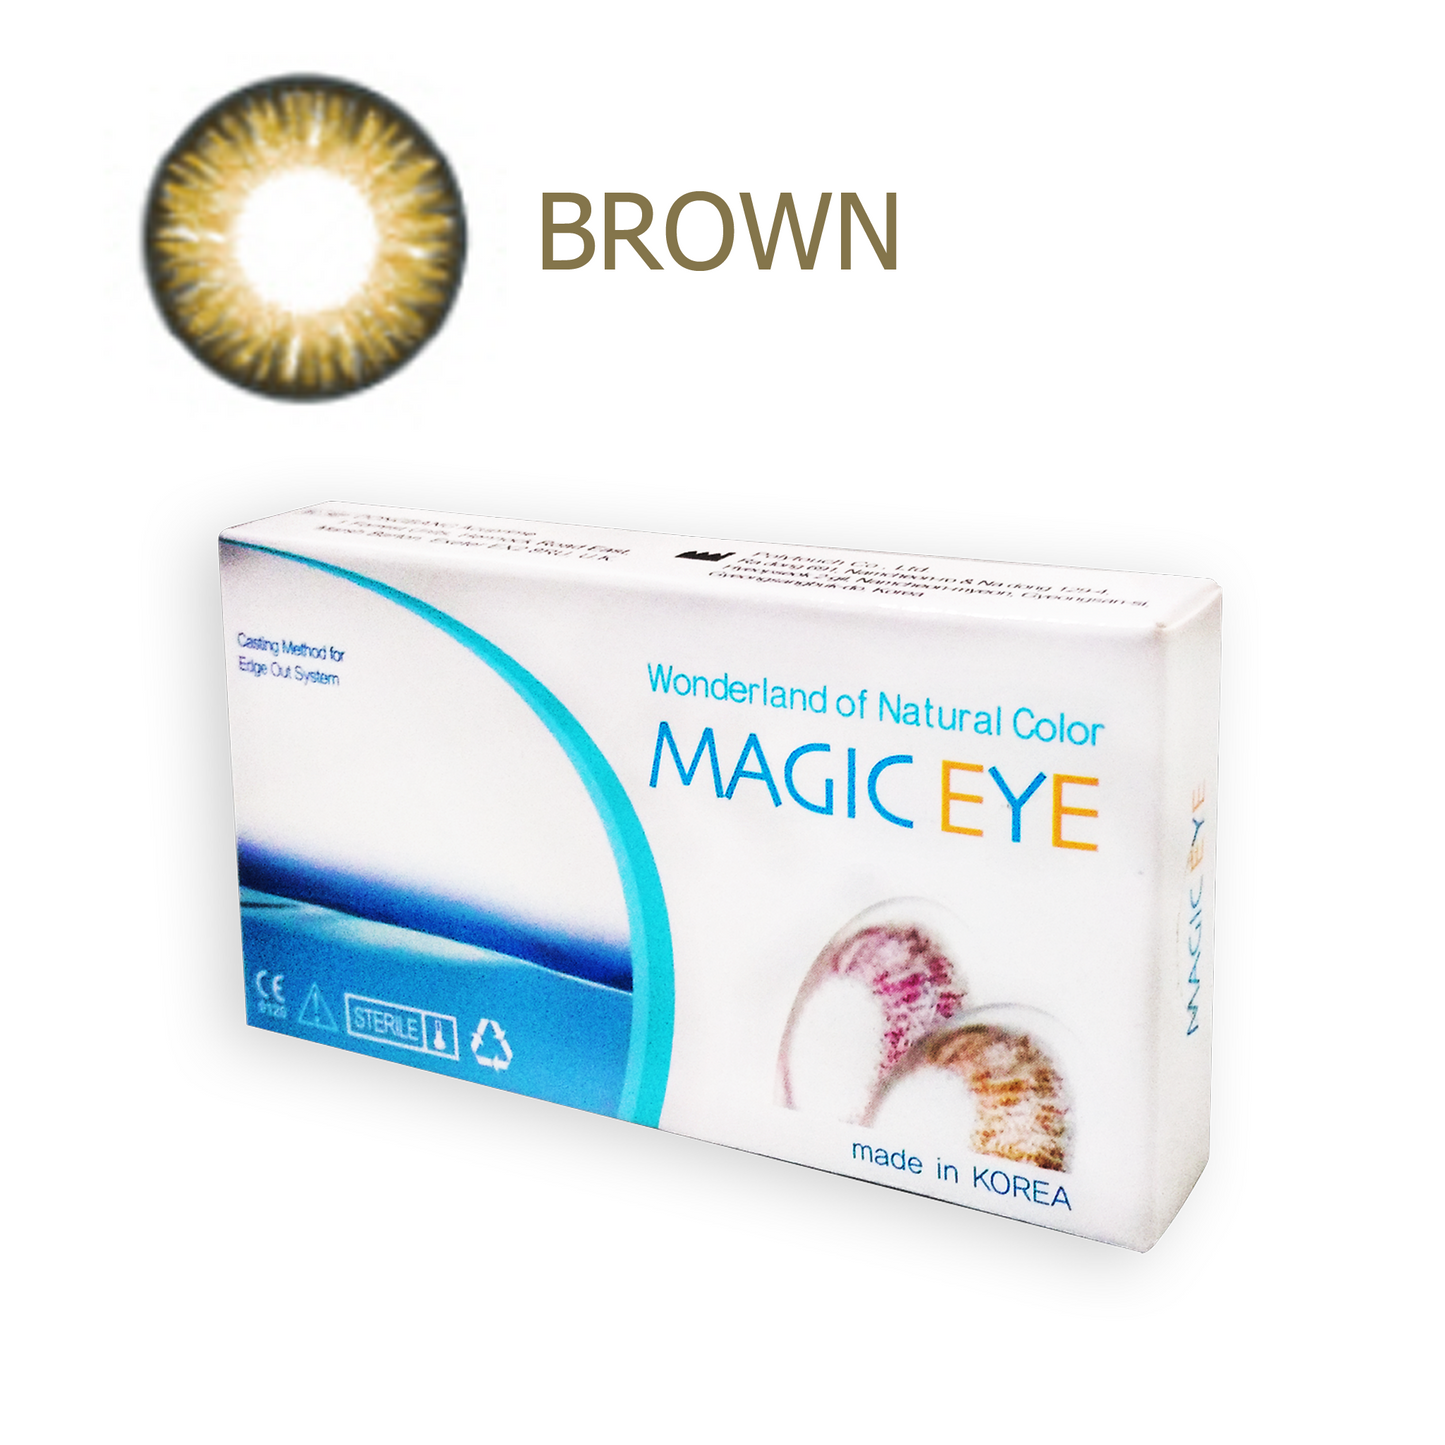 Magic Eye Colored Contact Lens (Brown)